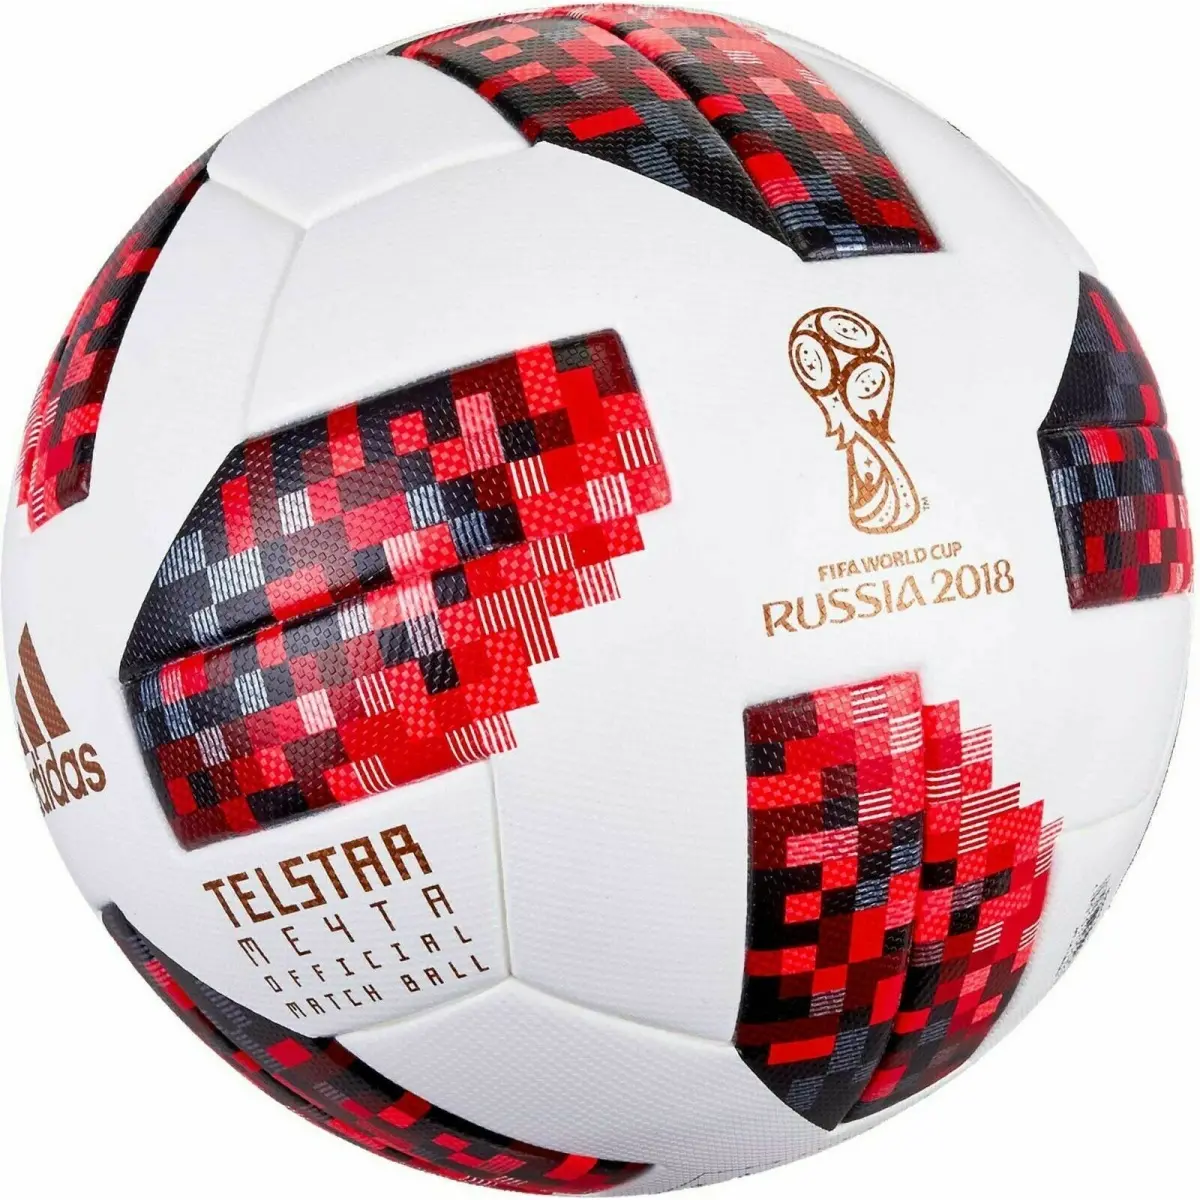 World Cup Football 2018 Replica Top Quality Genuine Match ball Size 5,4,3 